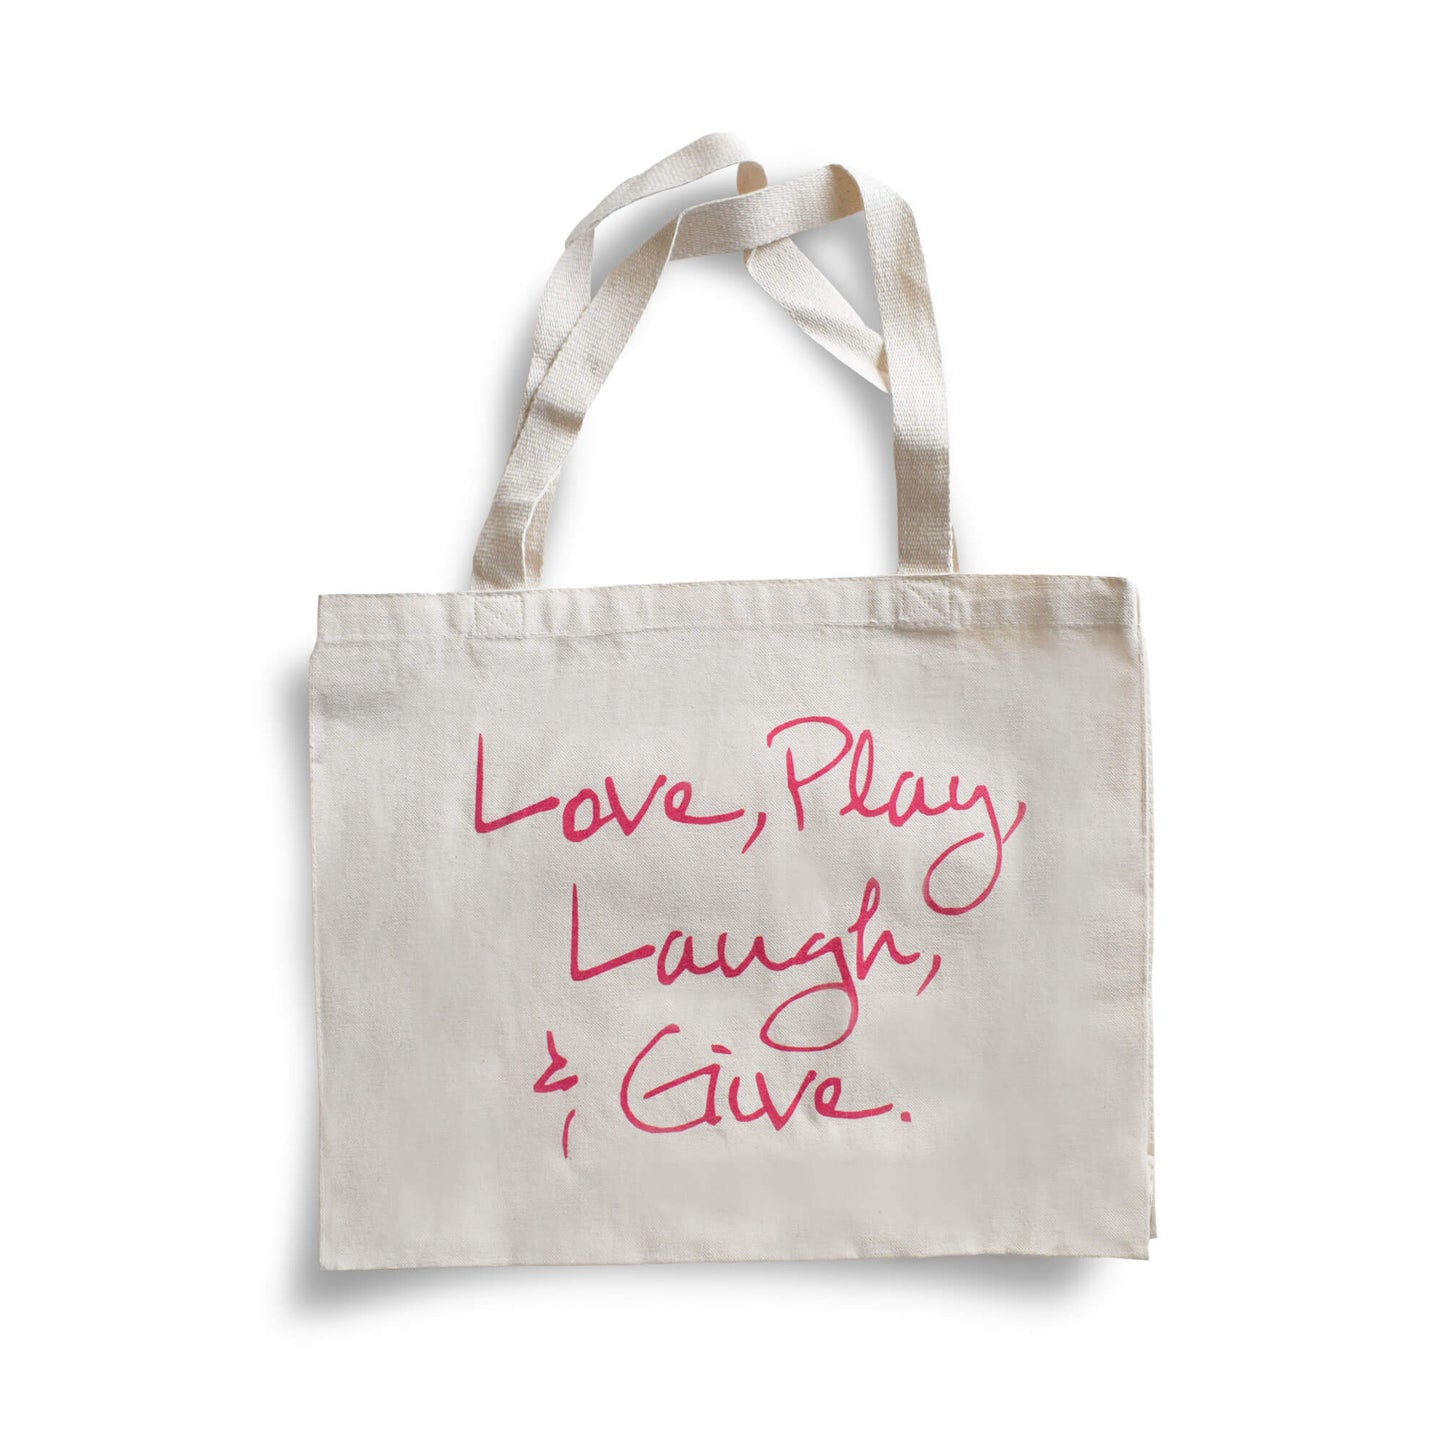 Bag: Love, Play, Laugh & Give